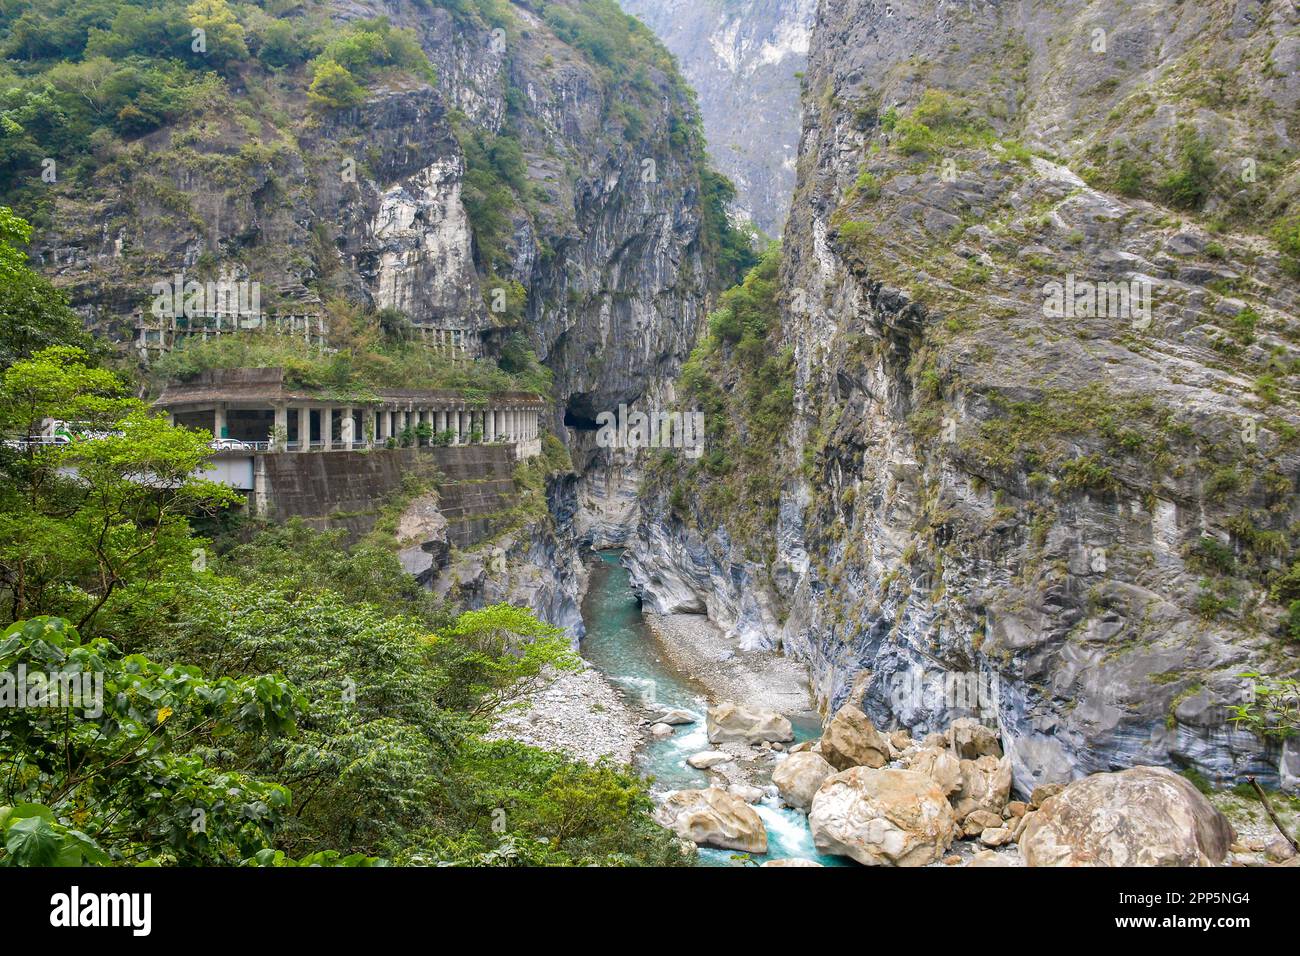 Swallow Grotto Yanzikou Trail with narrow turquoise Liwu River Gorge underneath and high mountain cliff face in Taroko National Park, Xiulin Township, Stock Photo